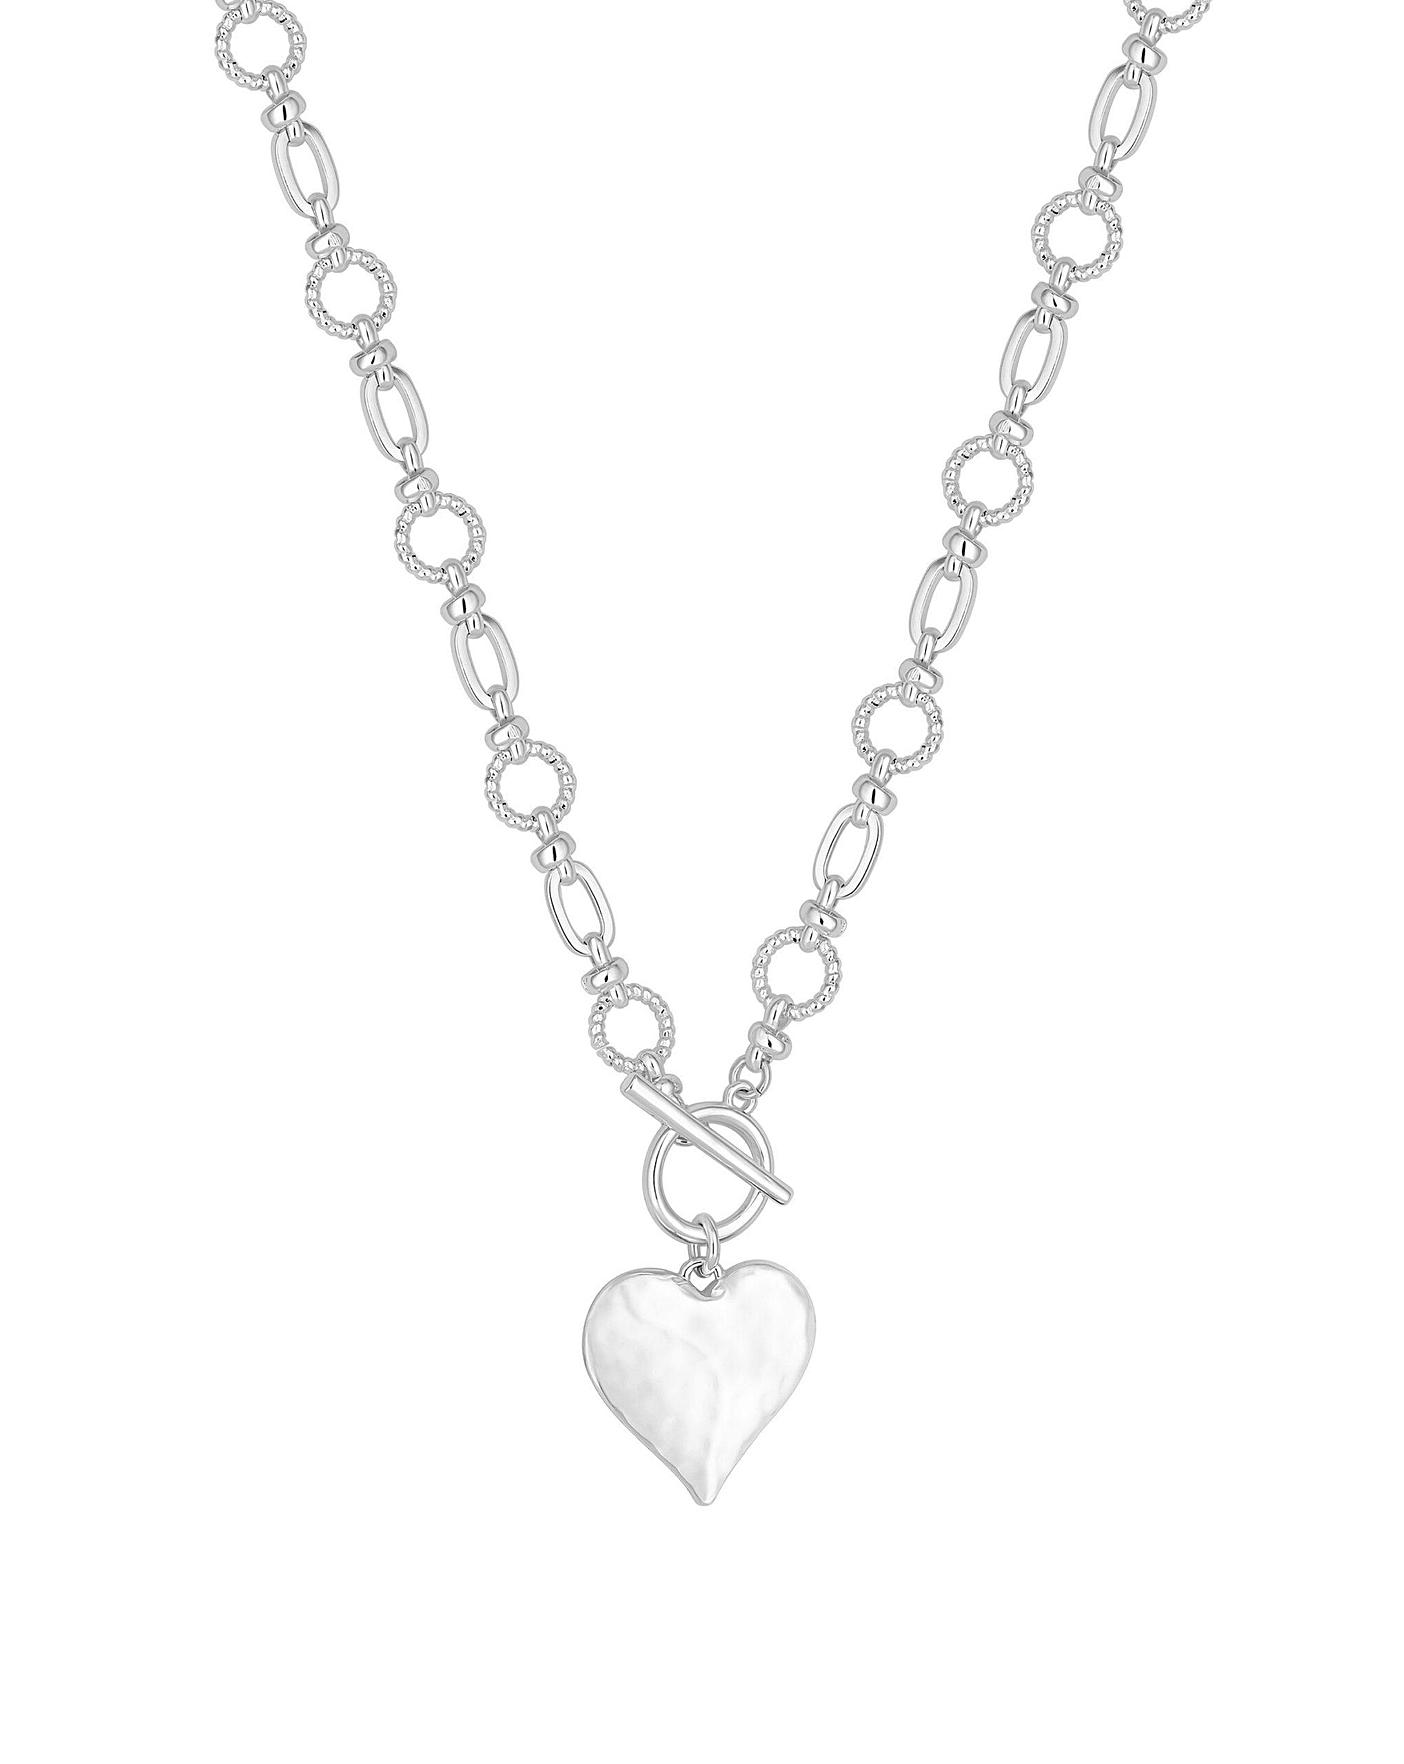 Heart Mood Necklace – Best Mood Rings